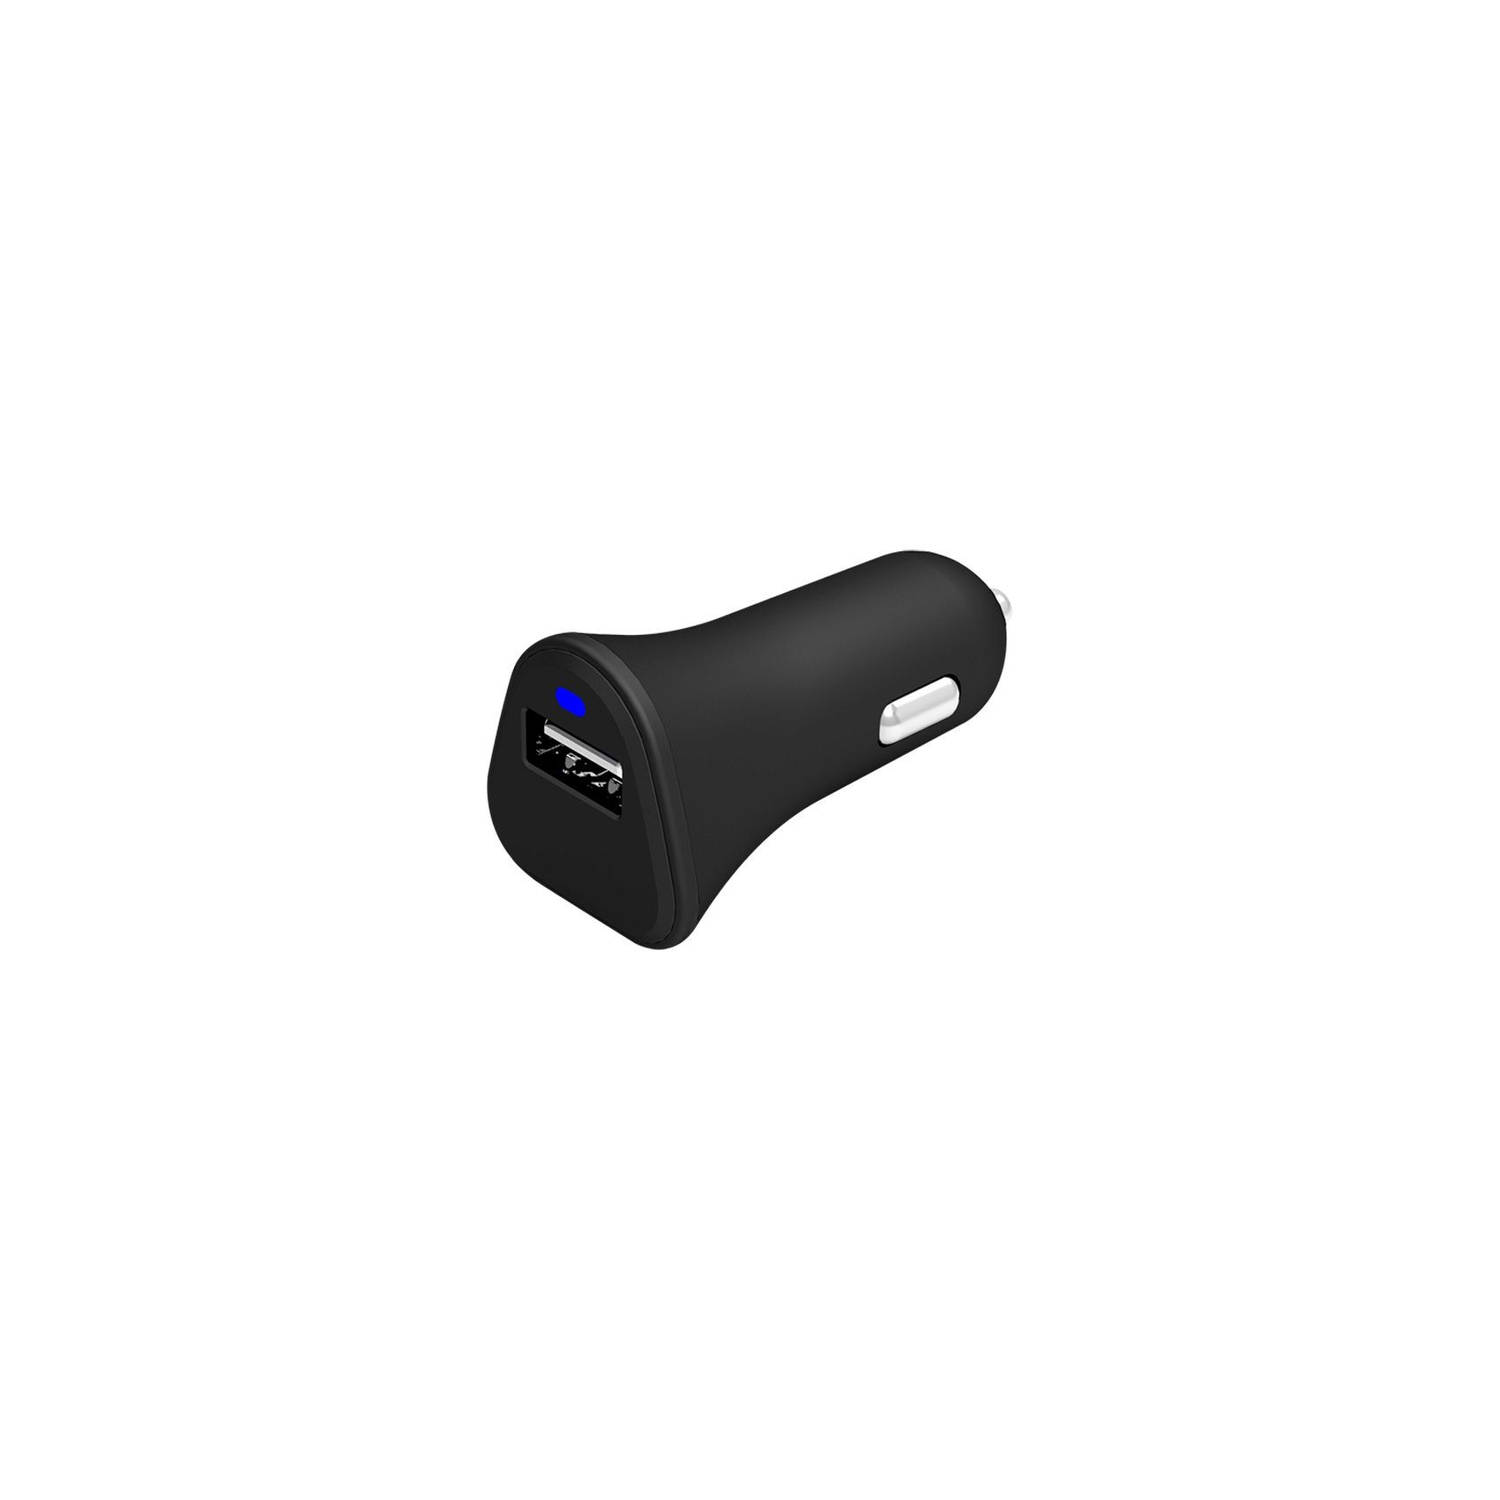 Autolader Met 1 Usb Poort Celly Procompact